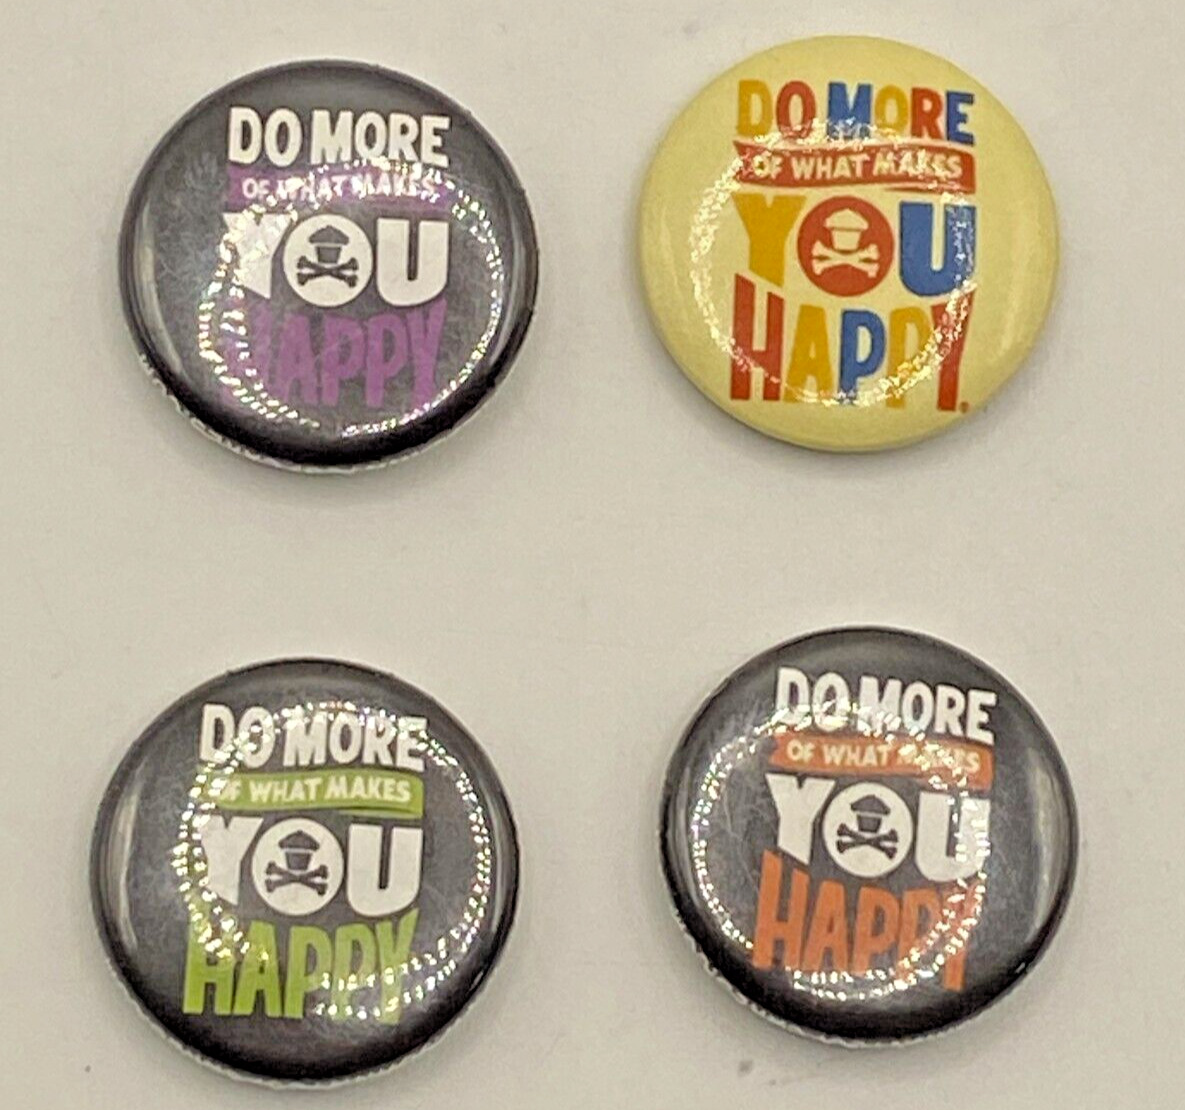 4 VINTAGE Johnny Cupcakes DO MORE OF WHAT MAKES YOU HAPPY PINS Boston